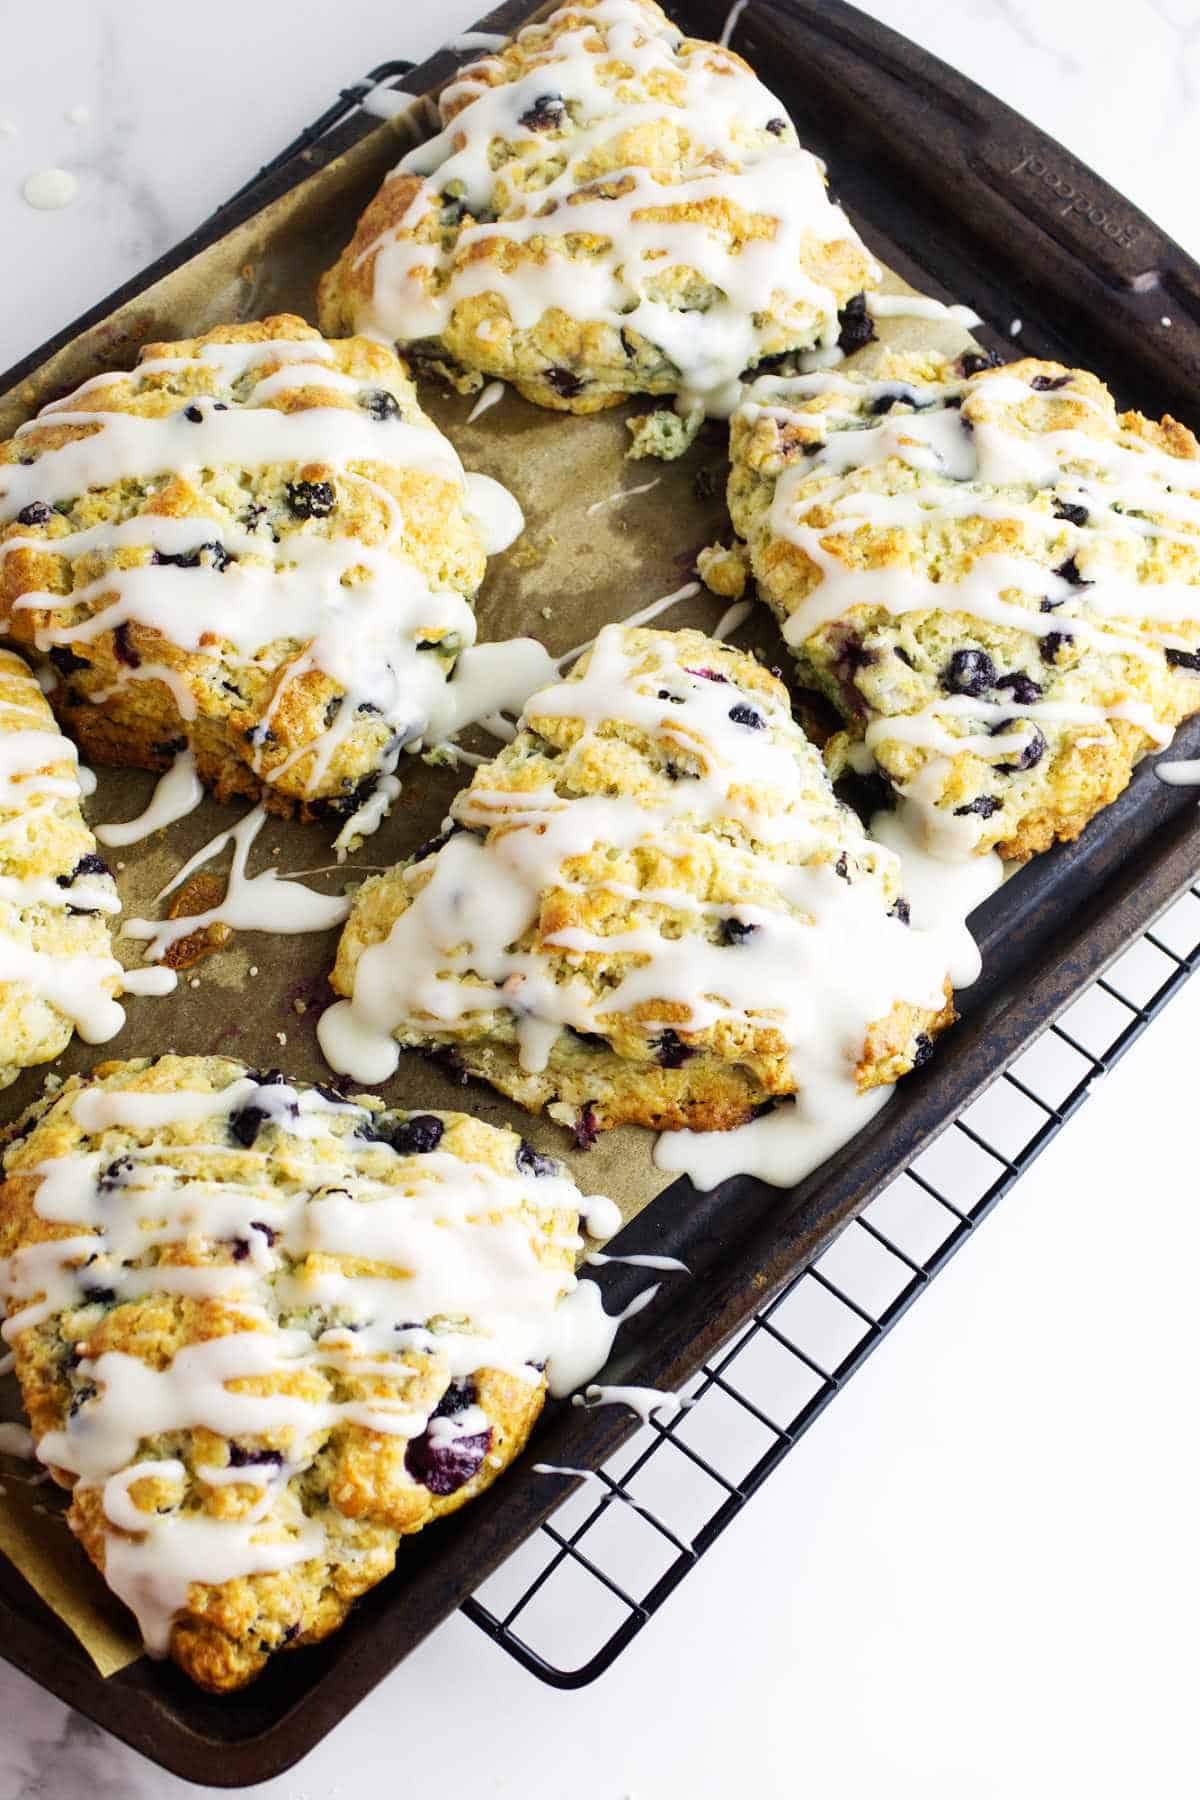 Icing drizzled over copycat starbucks blueberry scones on a baking sheet.